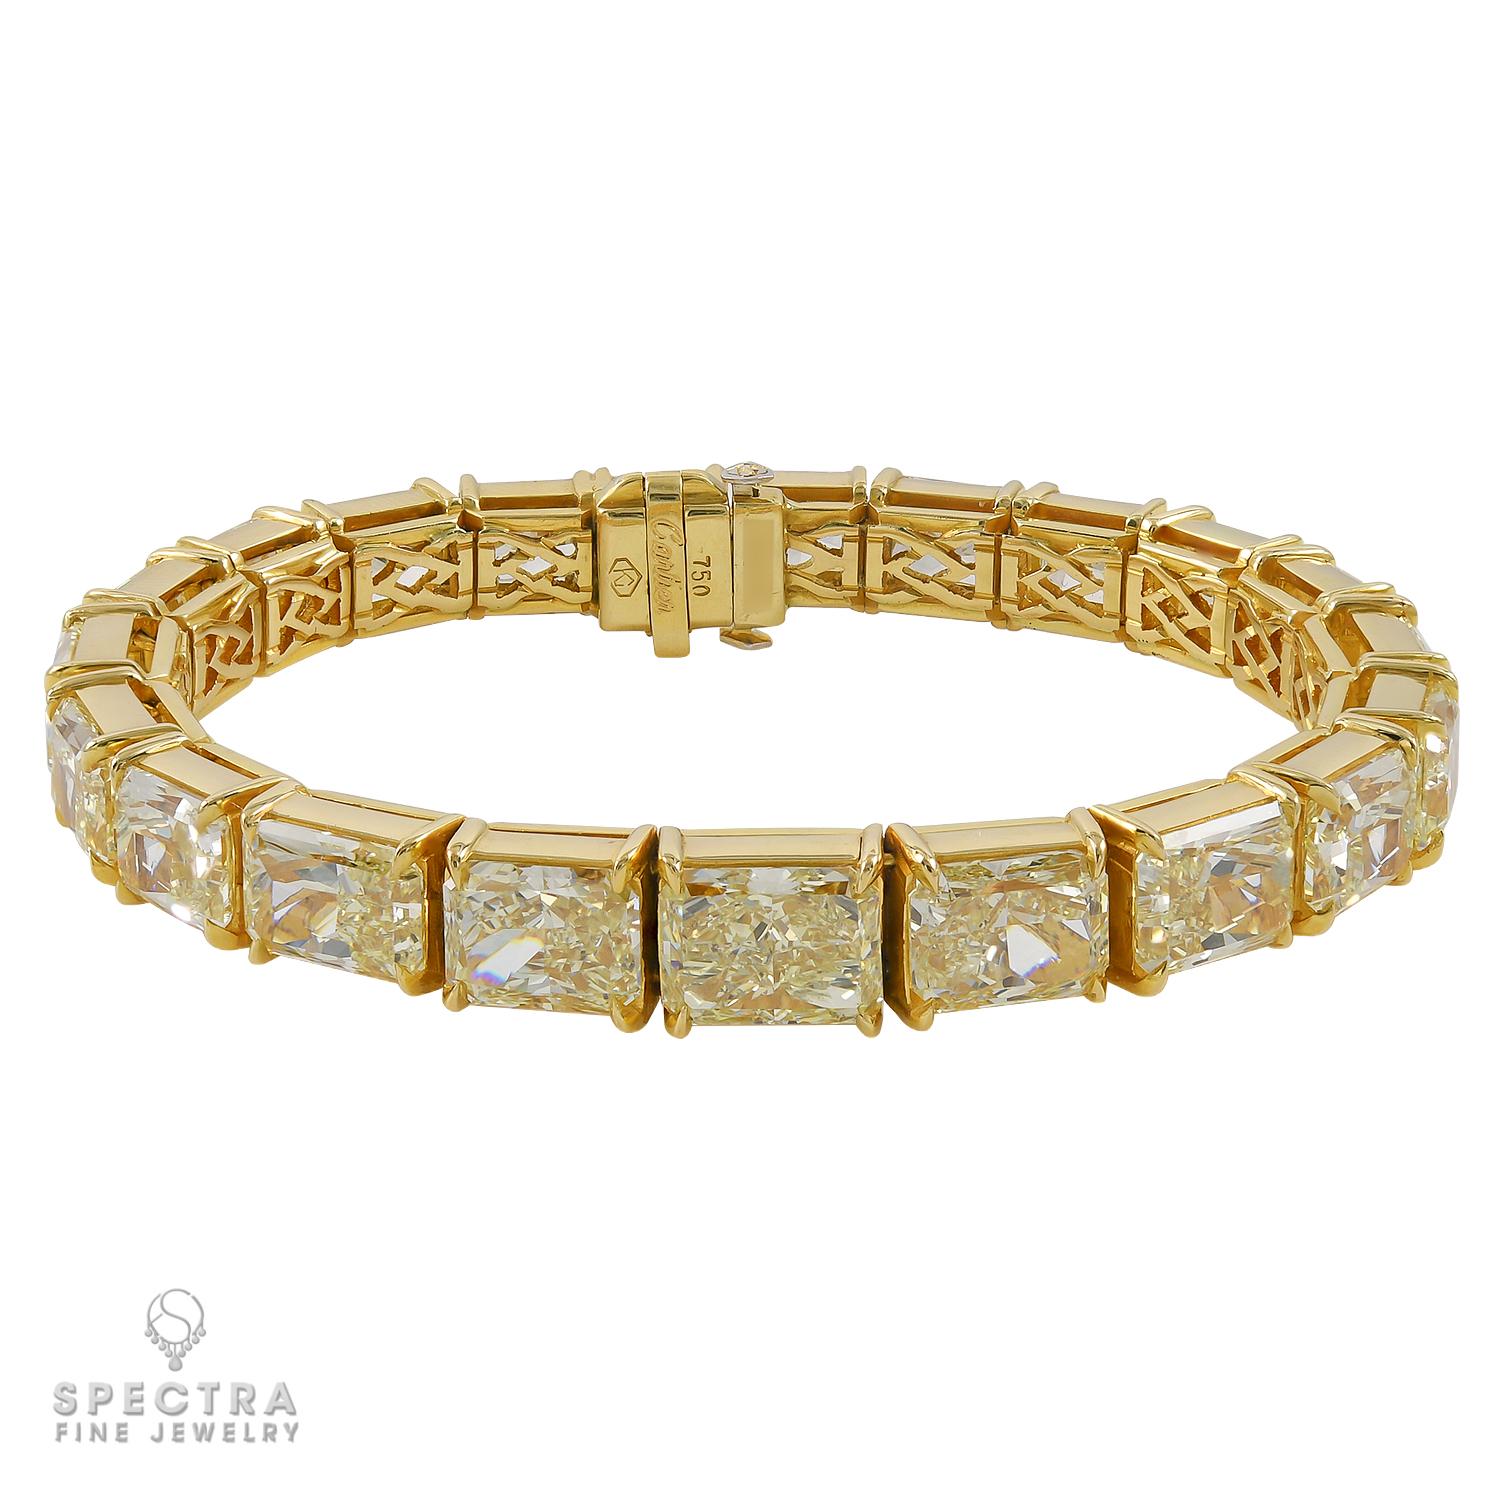 Cartier Fancy Yellow Diamond Bracelet In Excellent Condition For Sale In New York, NY